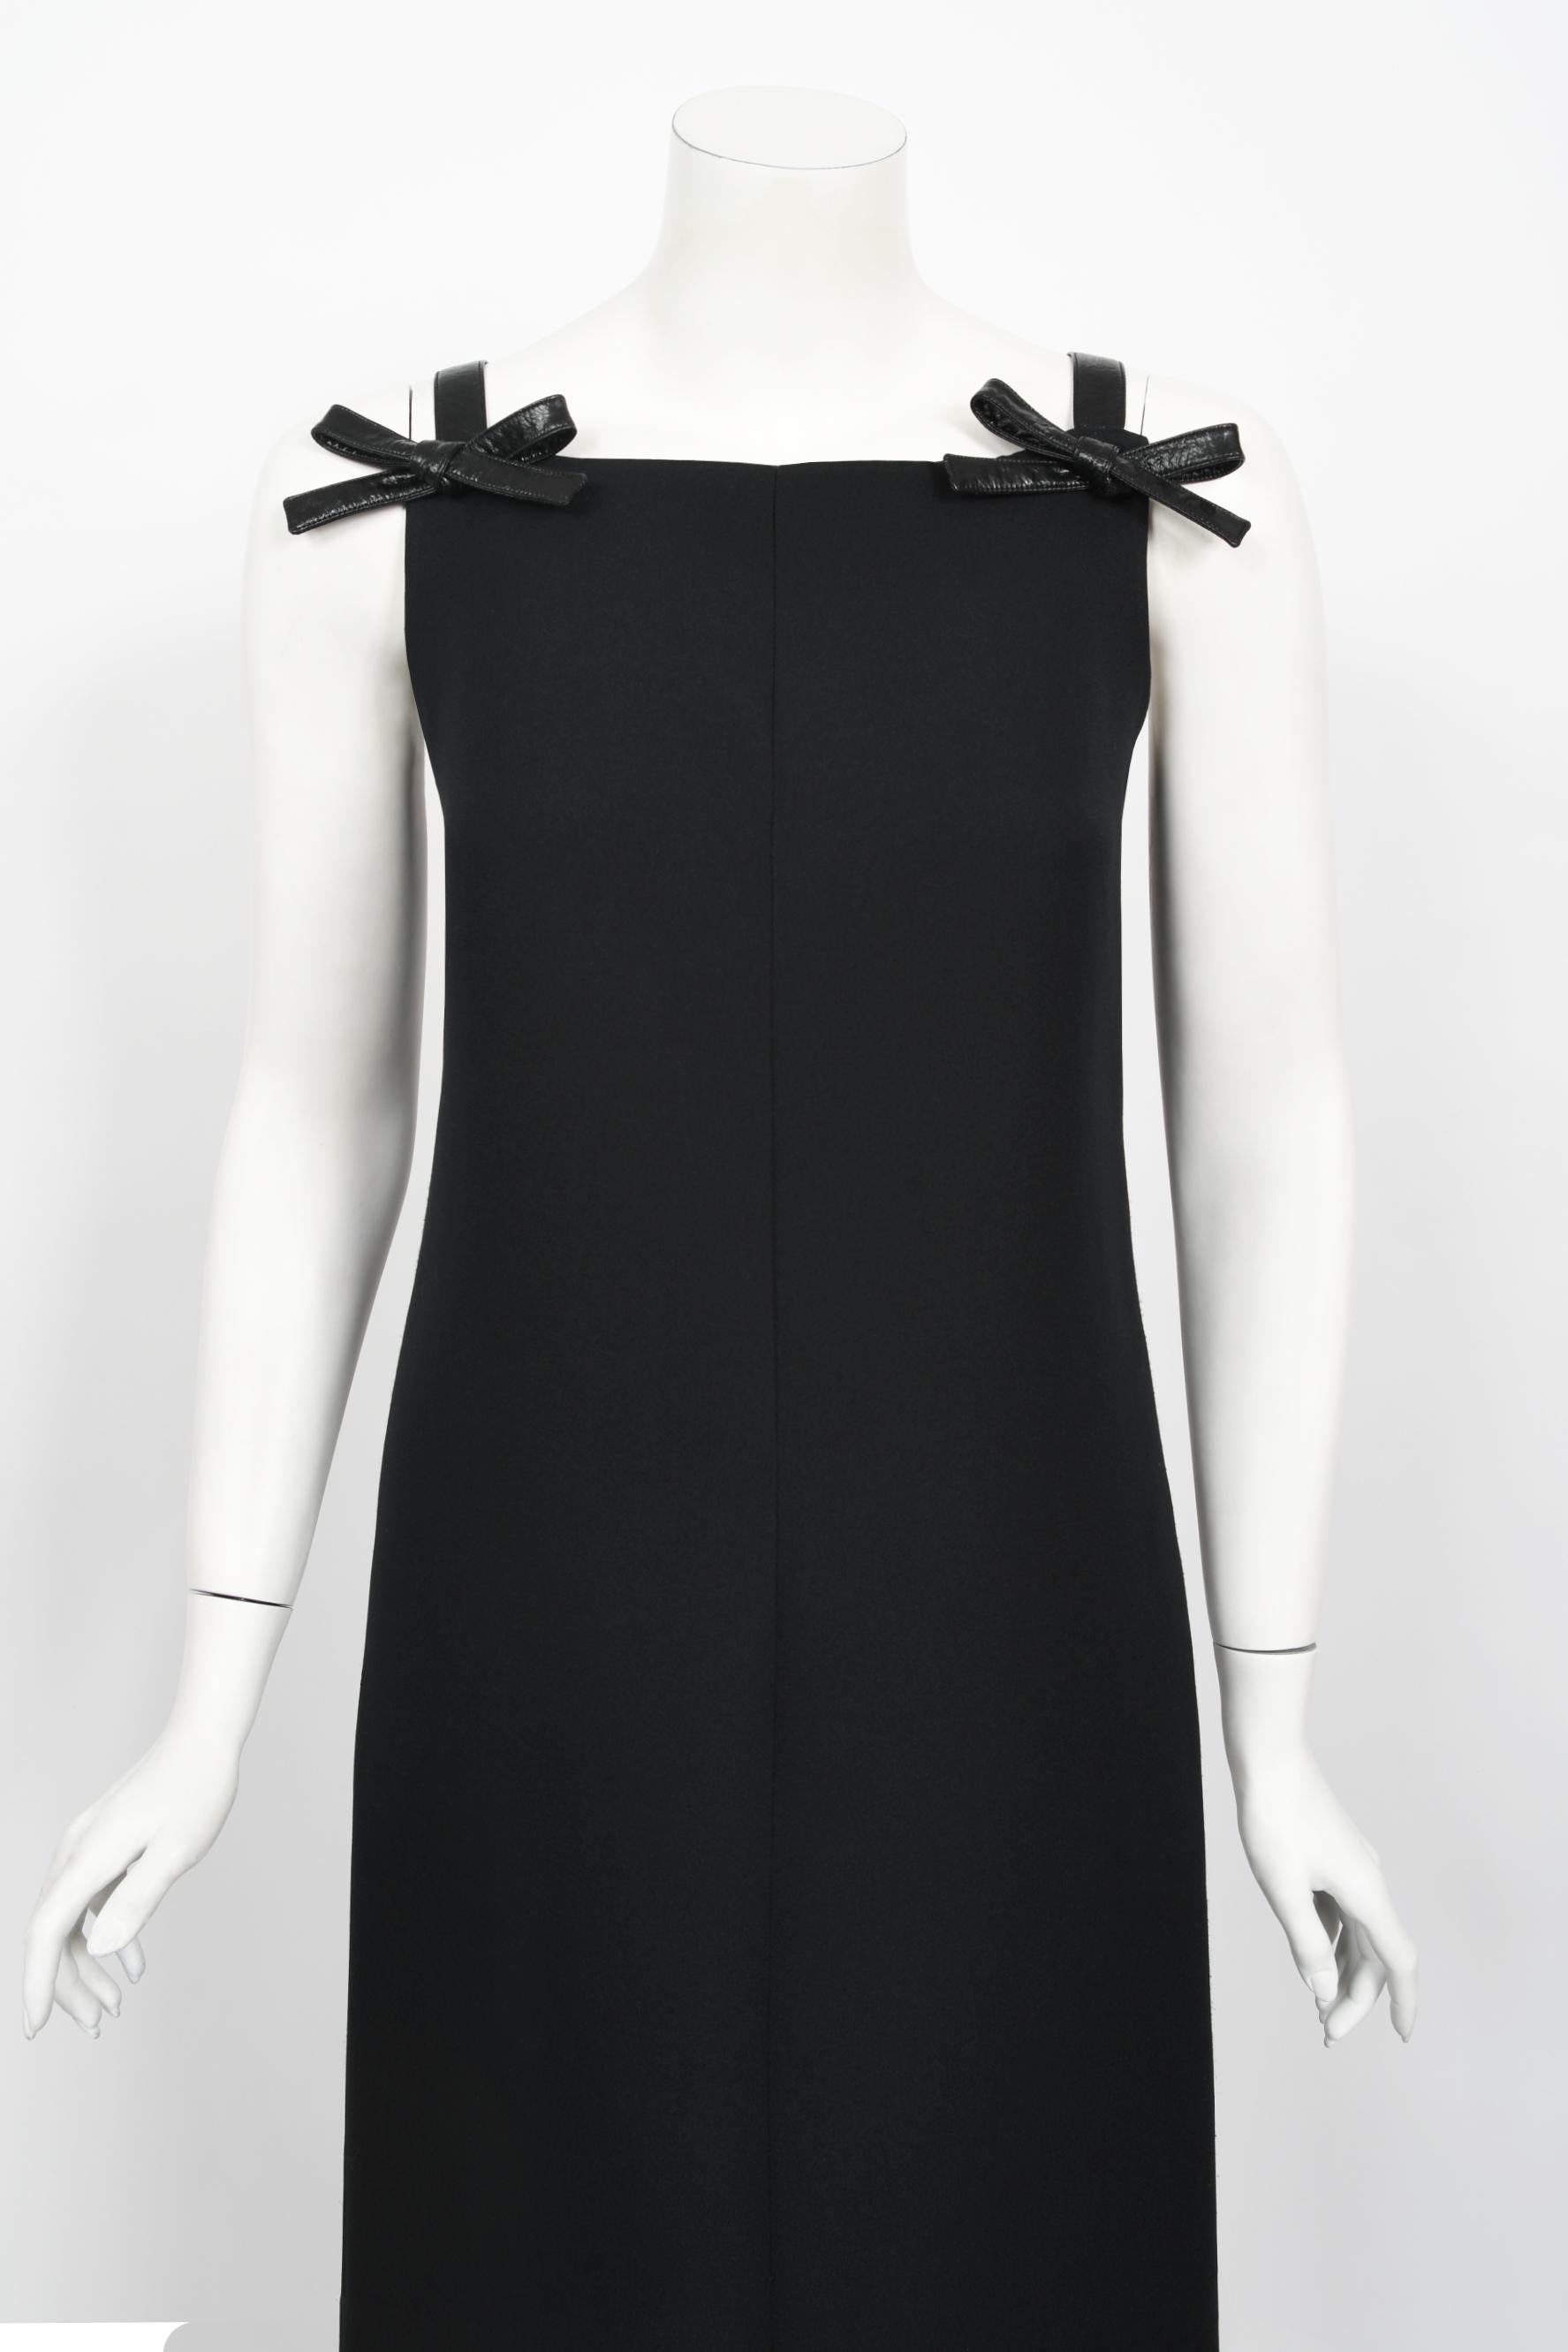 An ultra chic André Courrèges Paris vibrant black minimalist gown dating back to the late 1960's. Andre Courreges launched his unique space-age collection in 1964. The shapes of his clothes were geometric: squares, trapezoids, triangles. The main